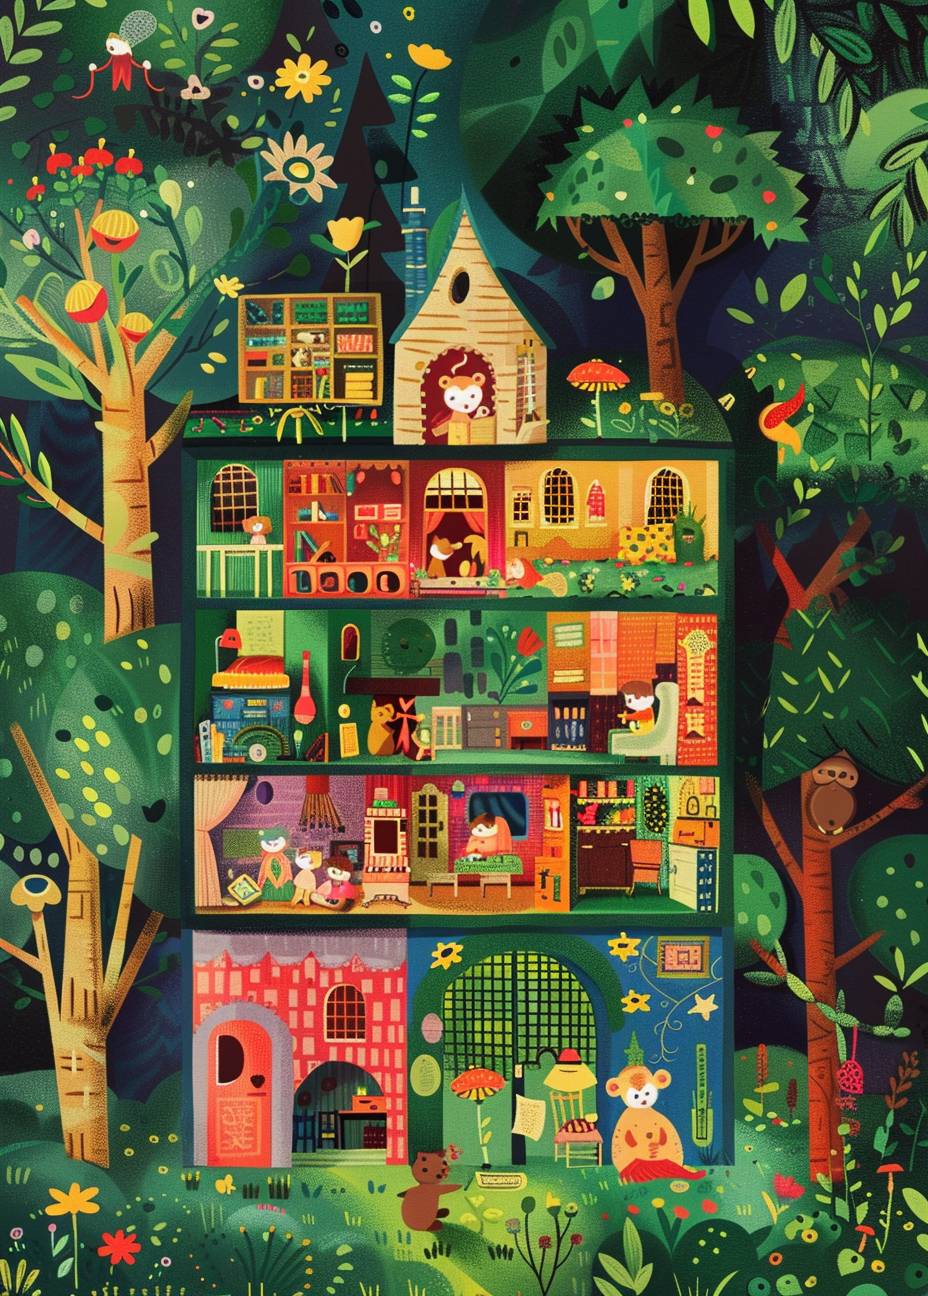 A vibrant and detailed illustration of an intricately designed dollhouse filled with various rooms, each featuring different cute animals engaged in activities like reading books or playing games. The outside features lush green grass surrounded by trees and flowers. In the style of Mary Blair's colorful whimsical illustrations.